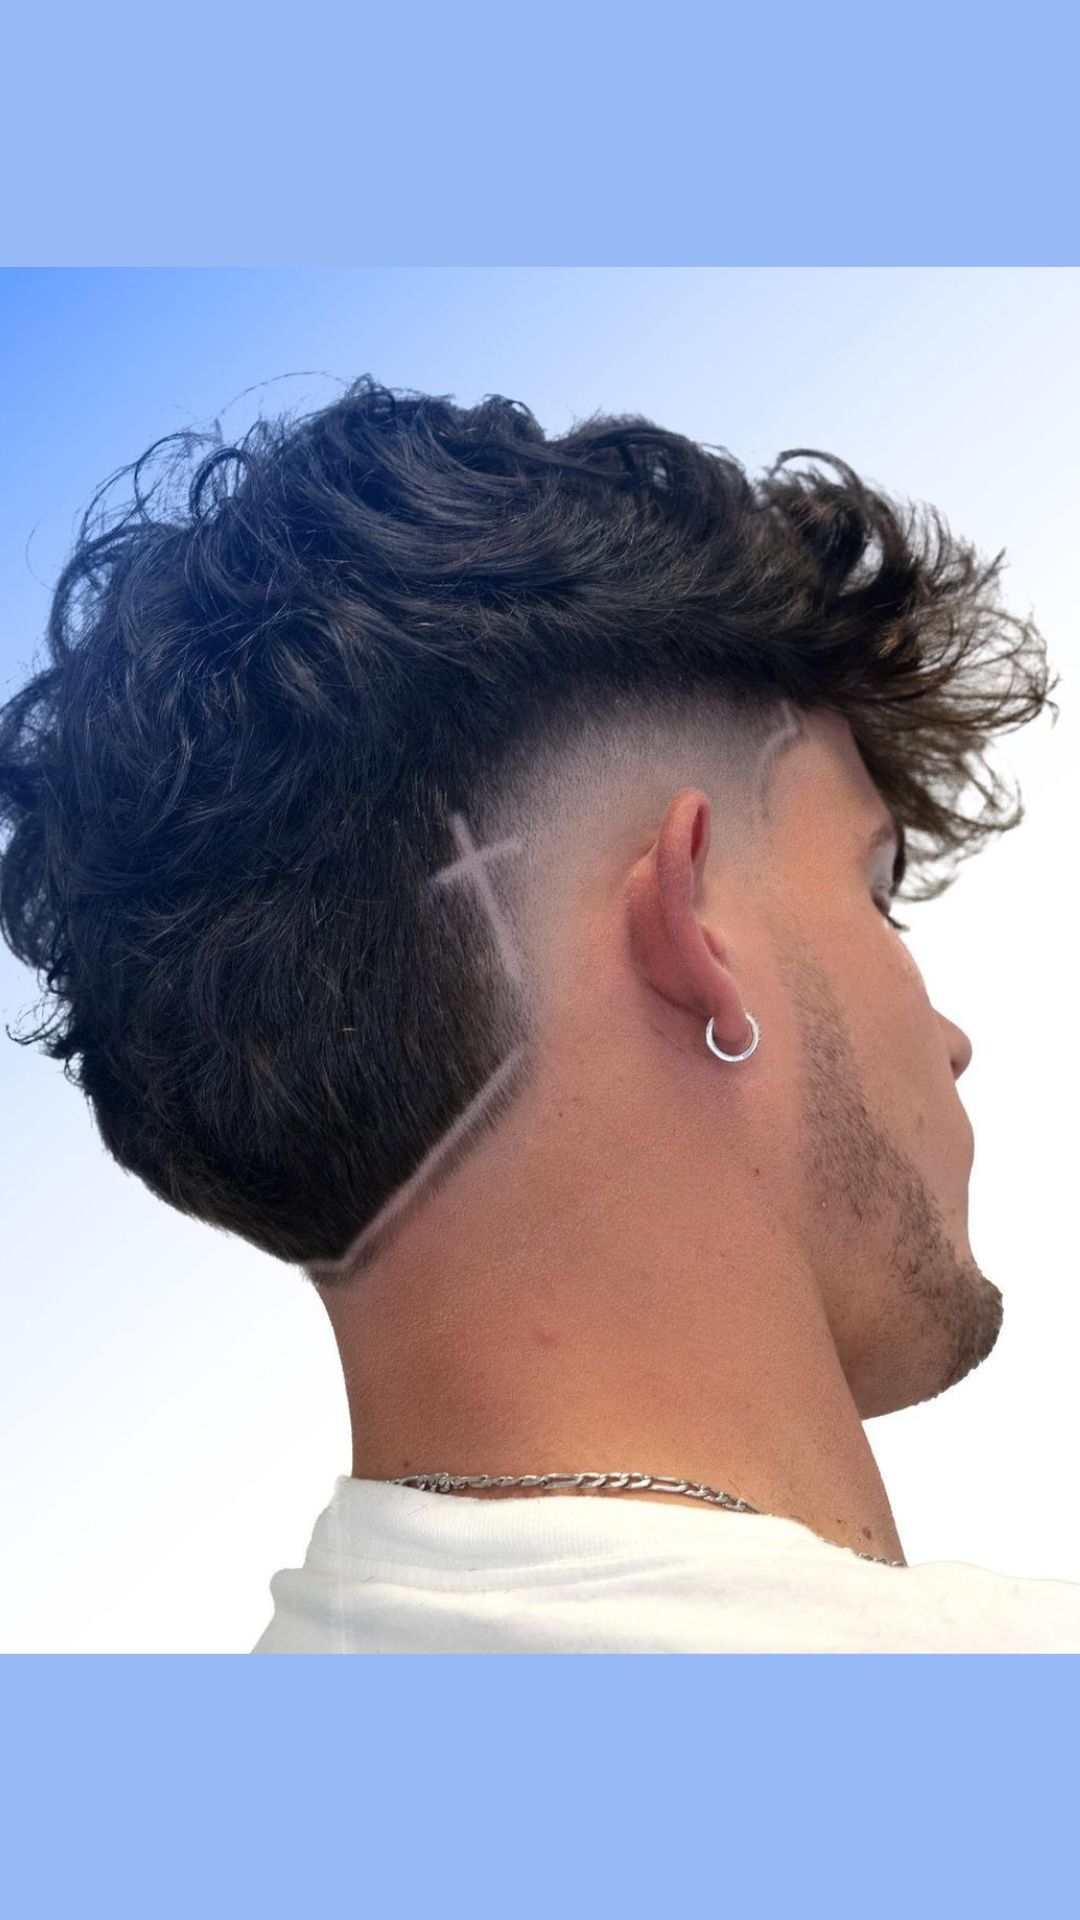 A man with a burst fade and design on hair.